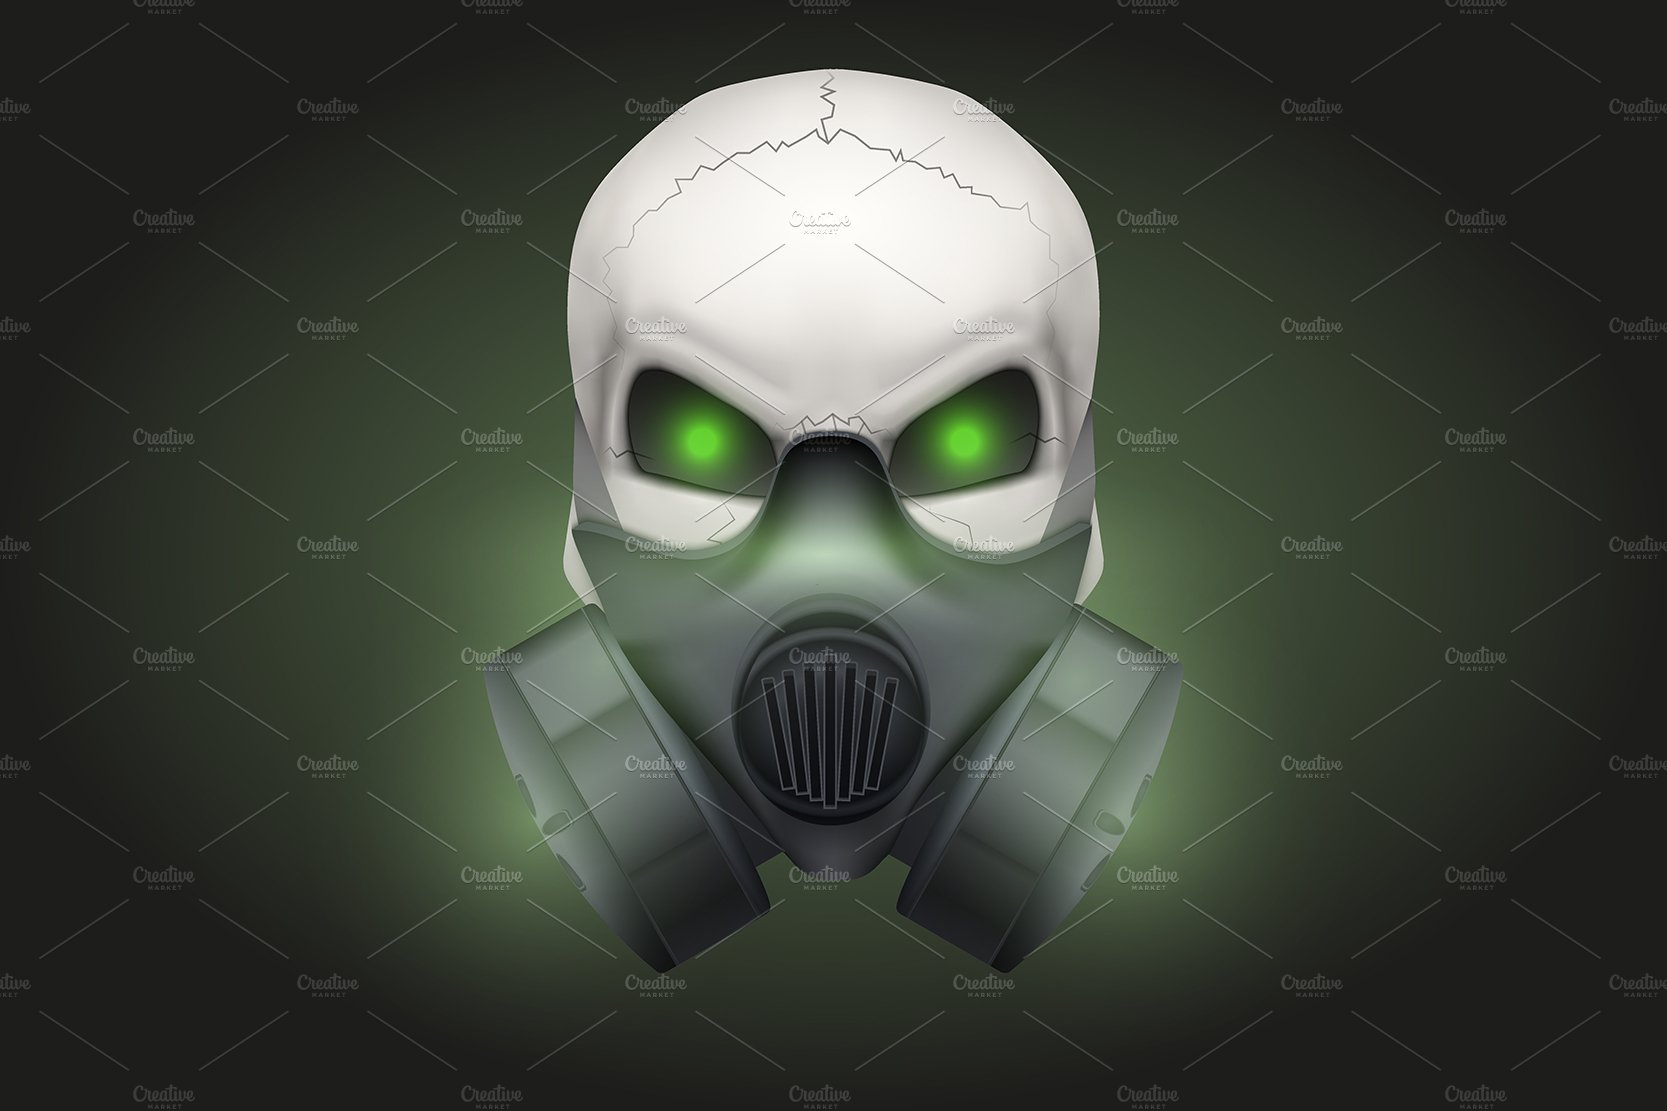 Skull with respirator cover image.